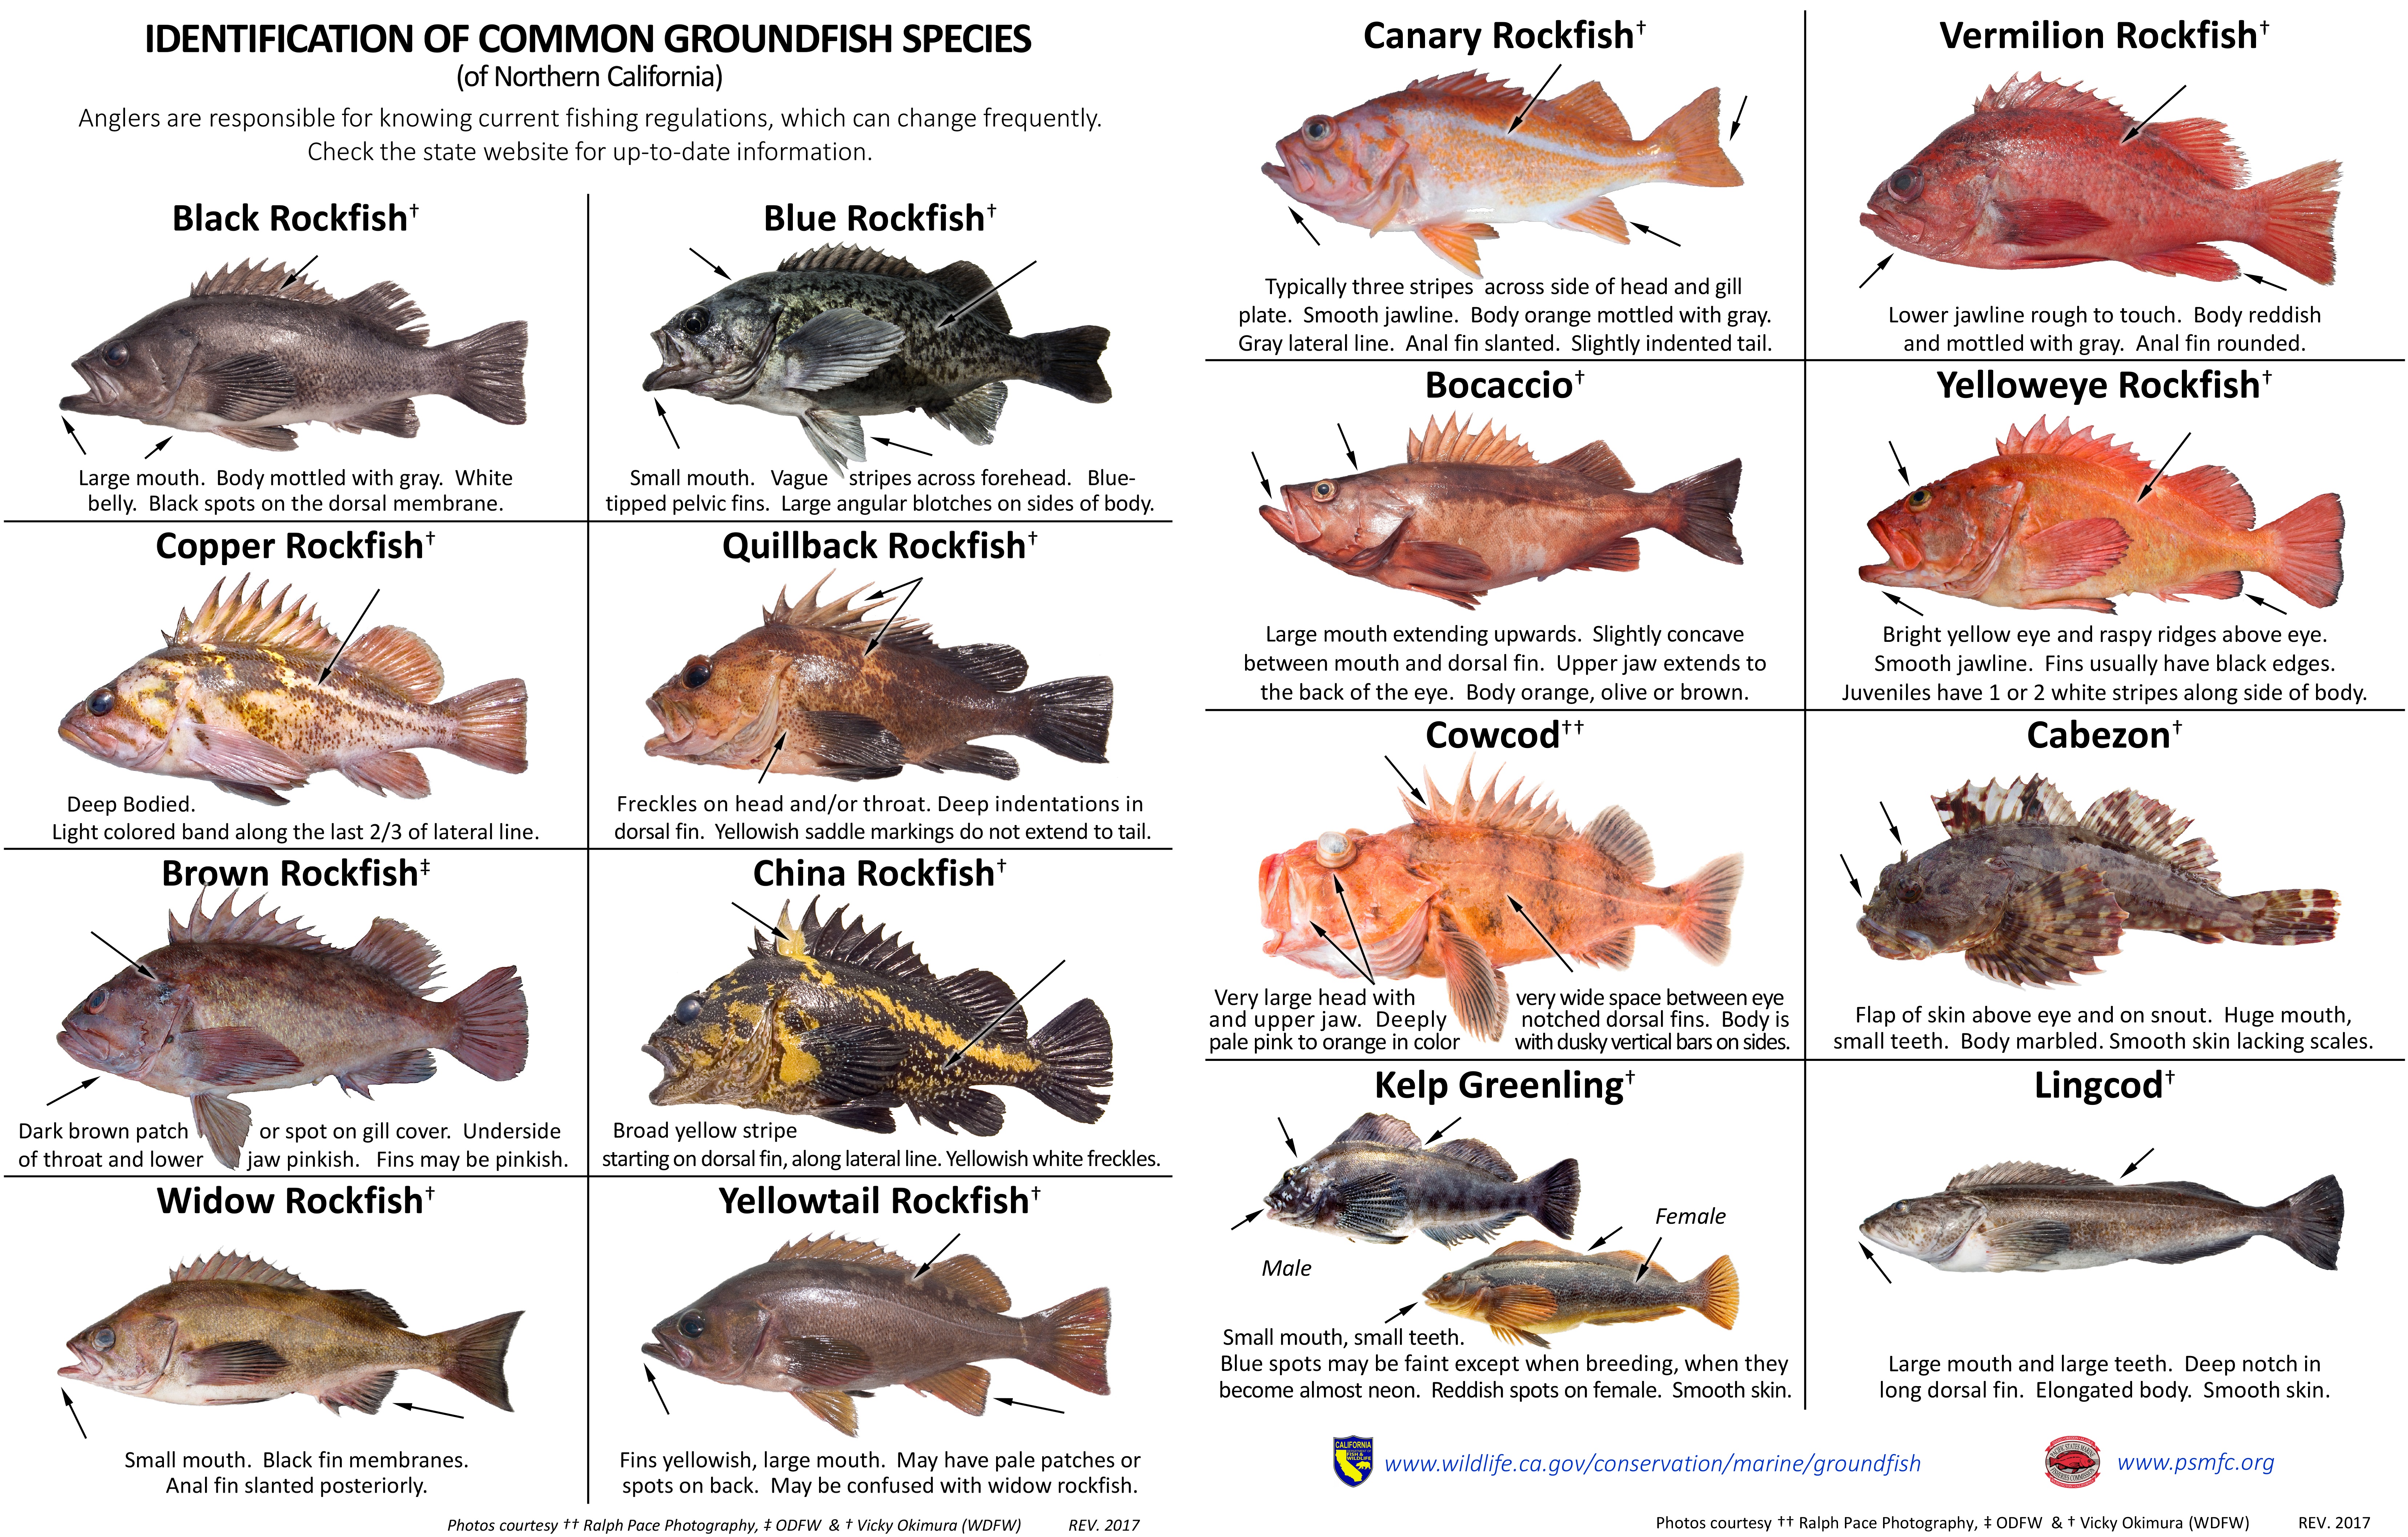 Identification of Common Groundfish Species of Northern California